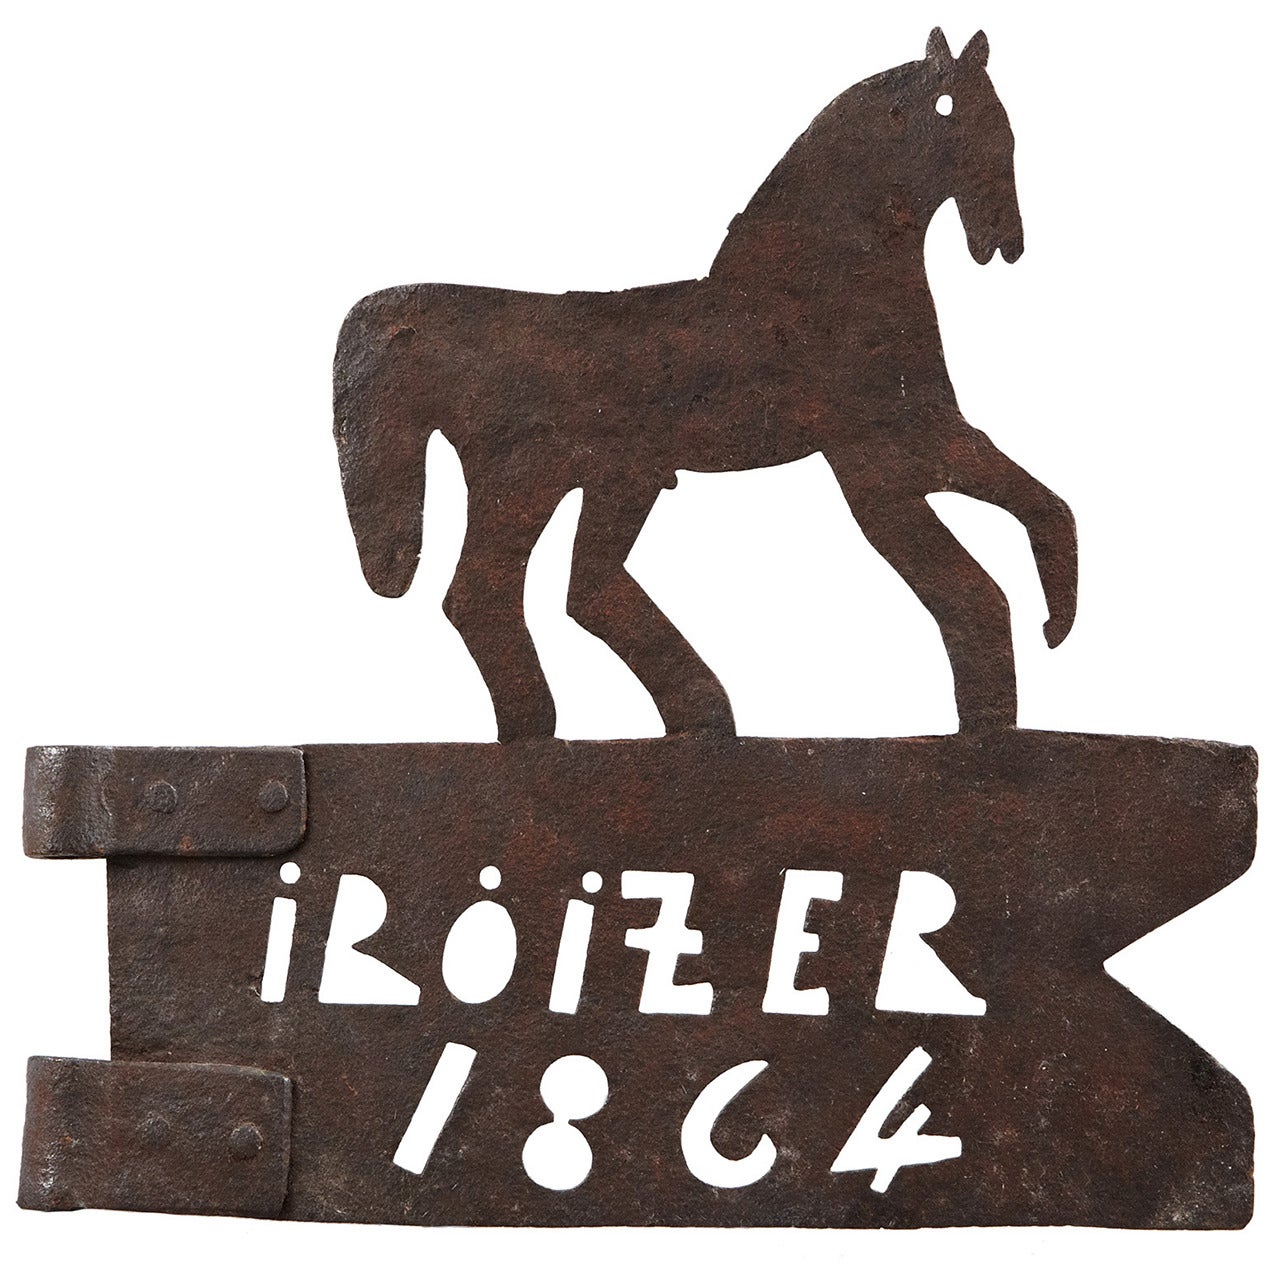 European metal Weathervane with horse dated1864.